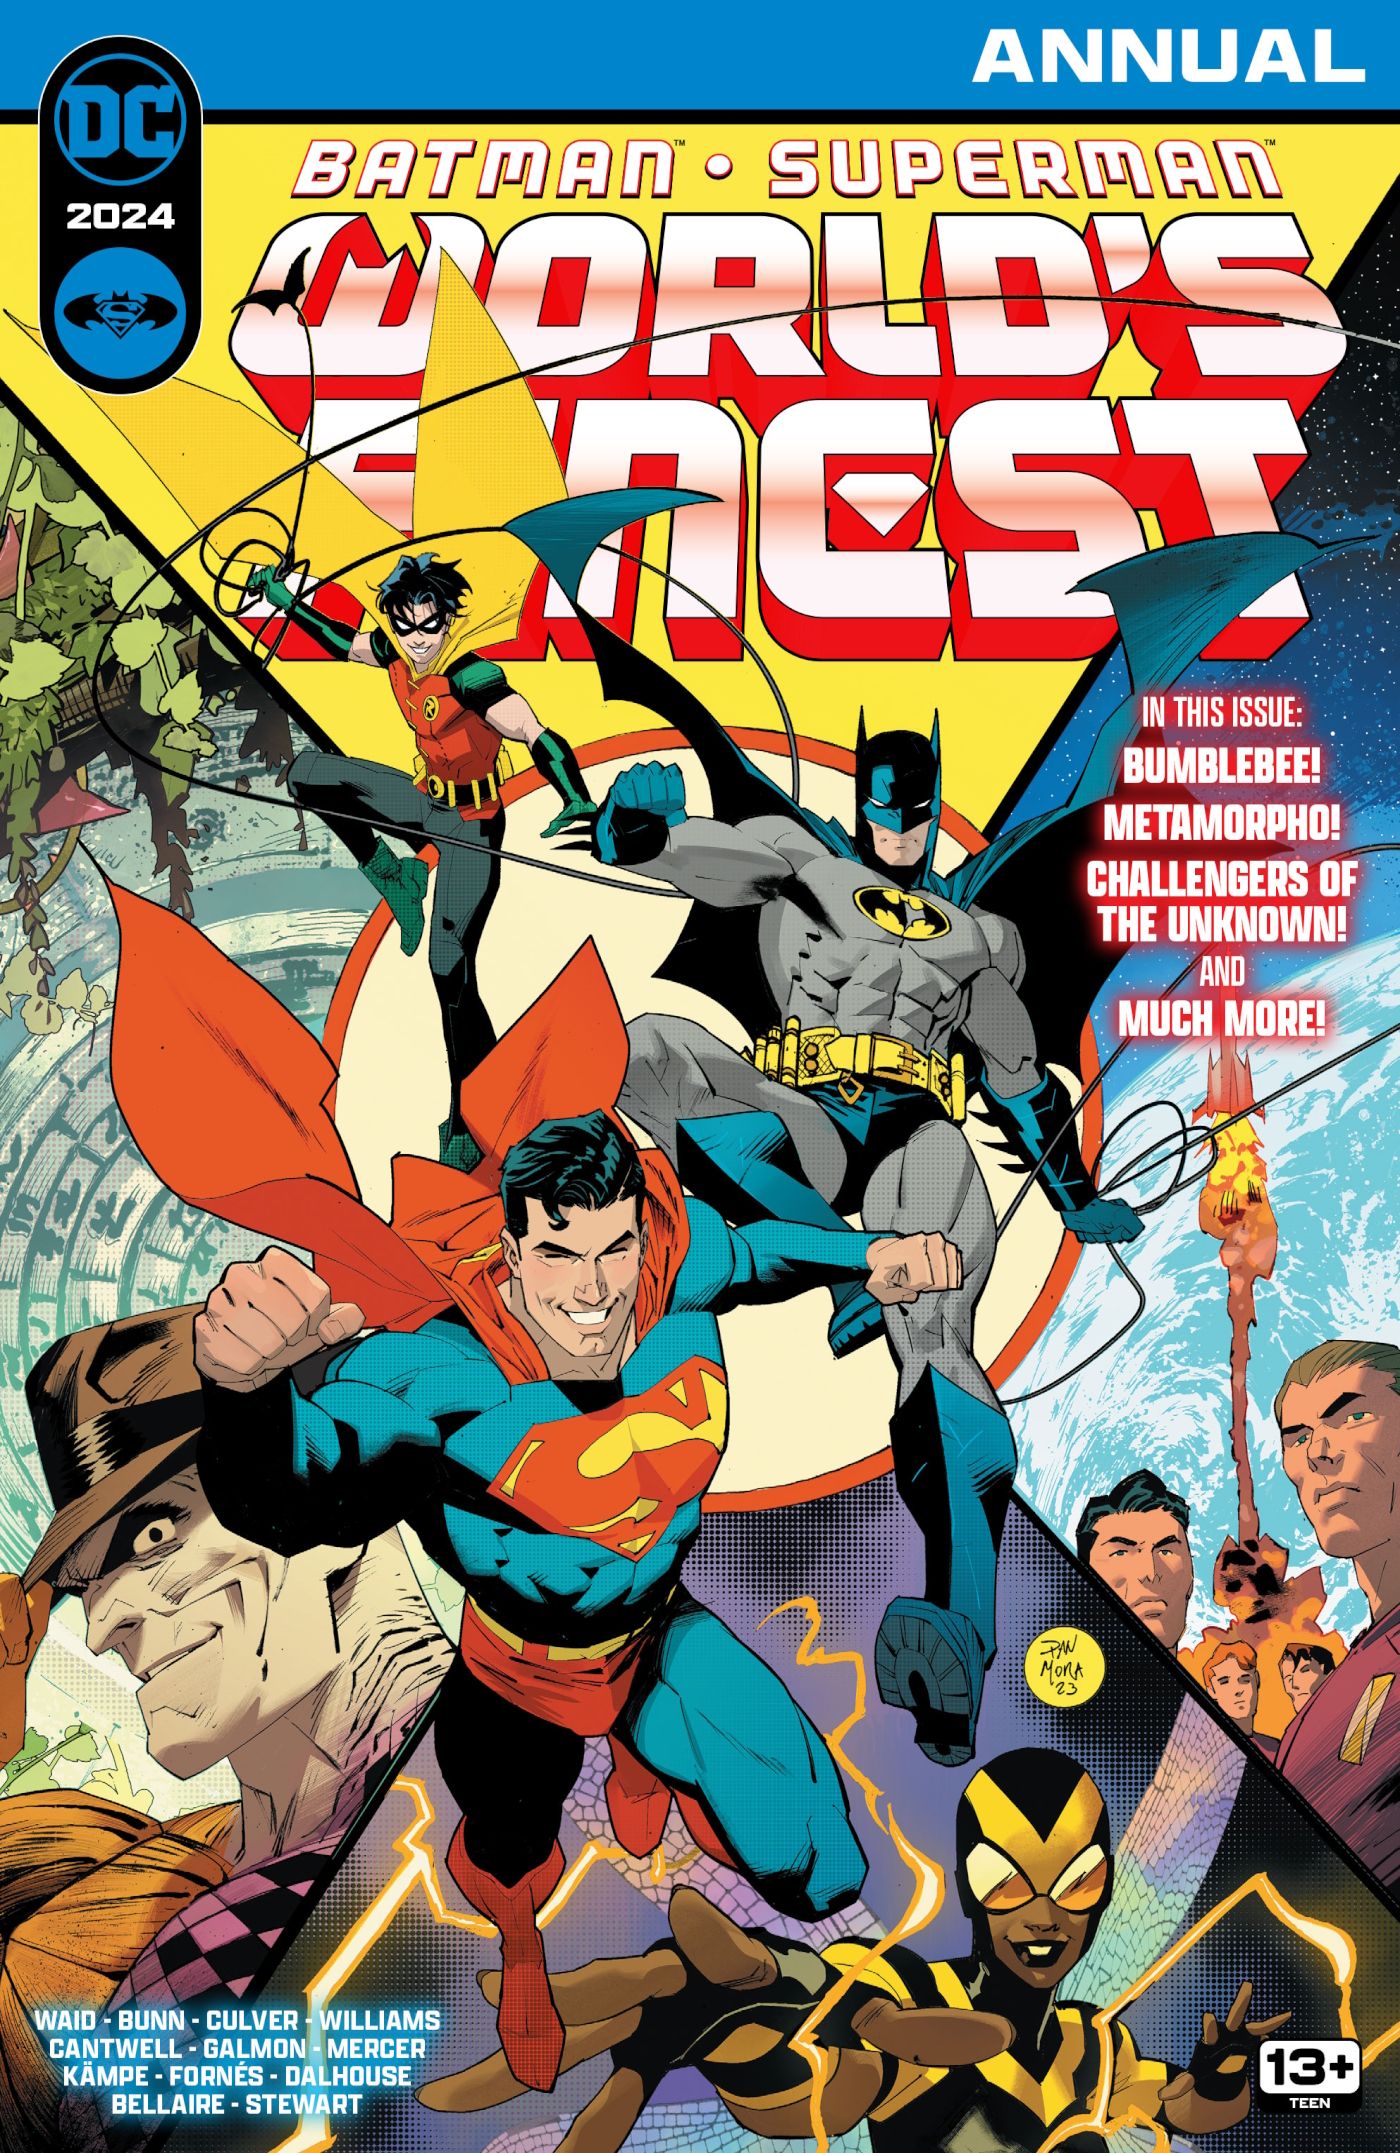 Batman Superman World's Finest 2024 Annual Main Cover: Batman and Superman at the center of a cover featuring other costumed superheroes.